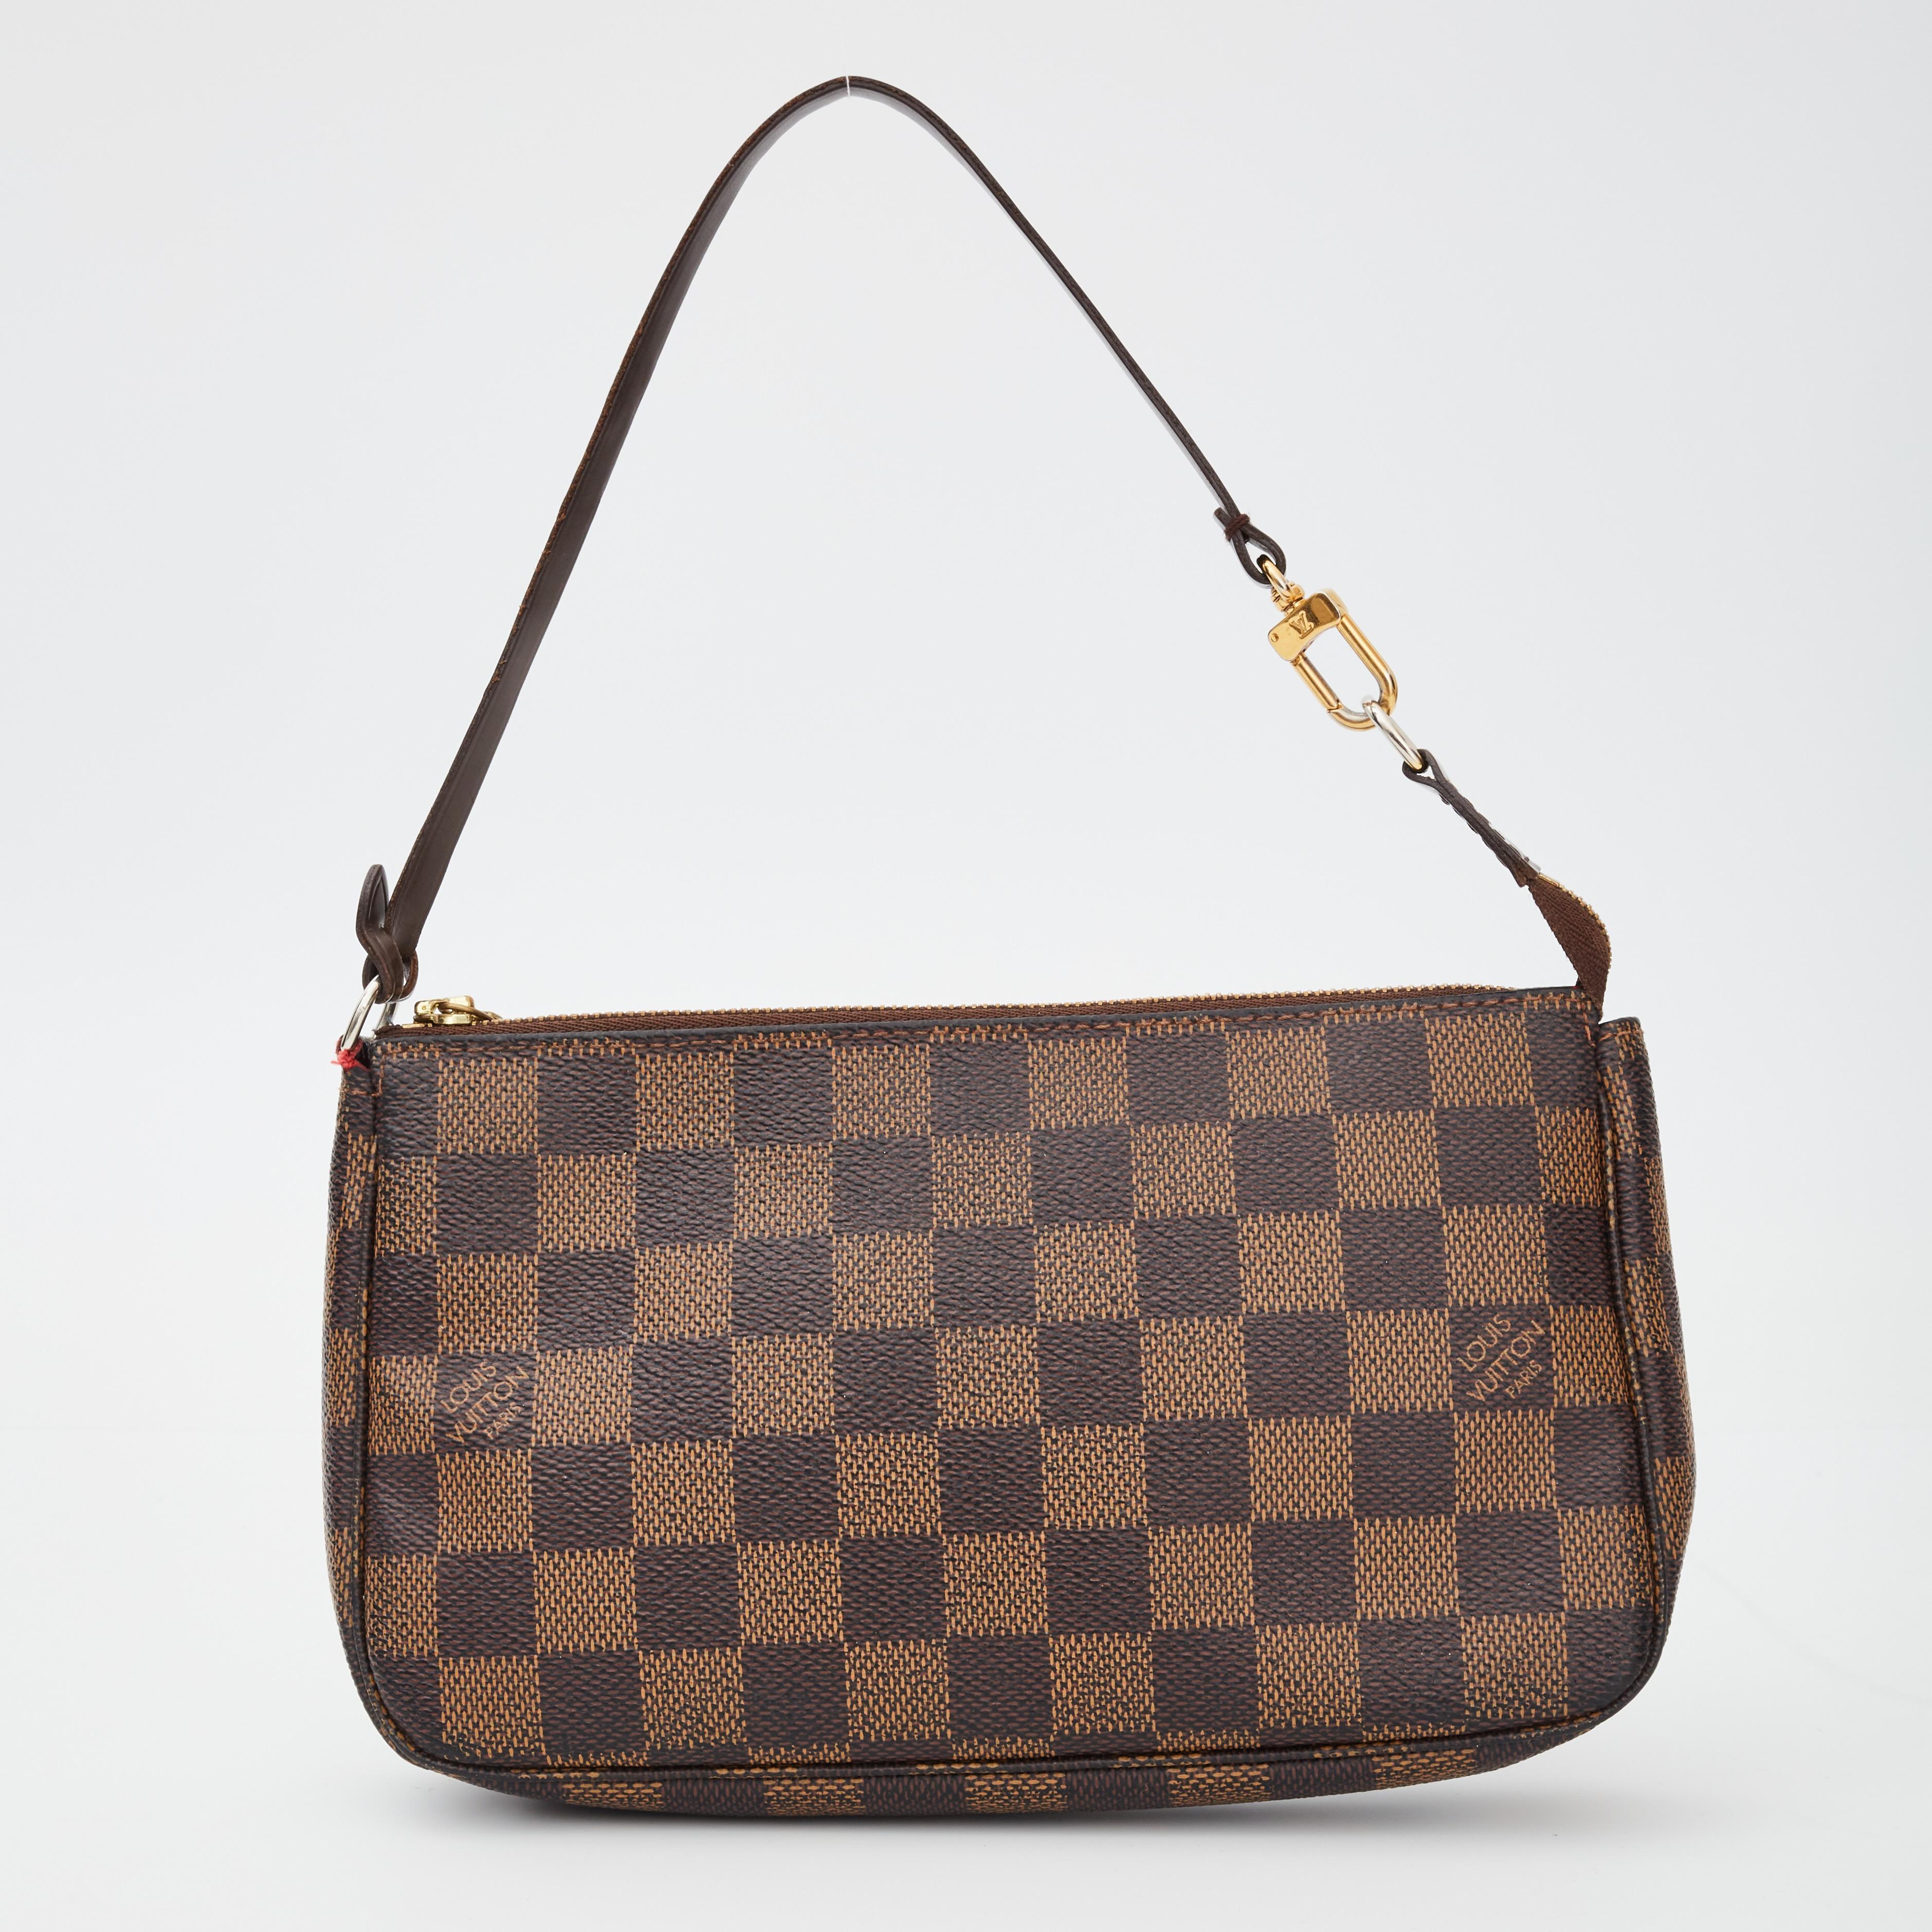 This little pochette bag is made with damier ebene coated canvas and features treated leather details including a removable flat leather top strap, top zip closure, gold tone hardware and red woven fabric interior lining.

COLOR: Brown
MATERIAL: